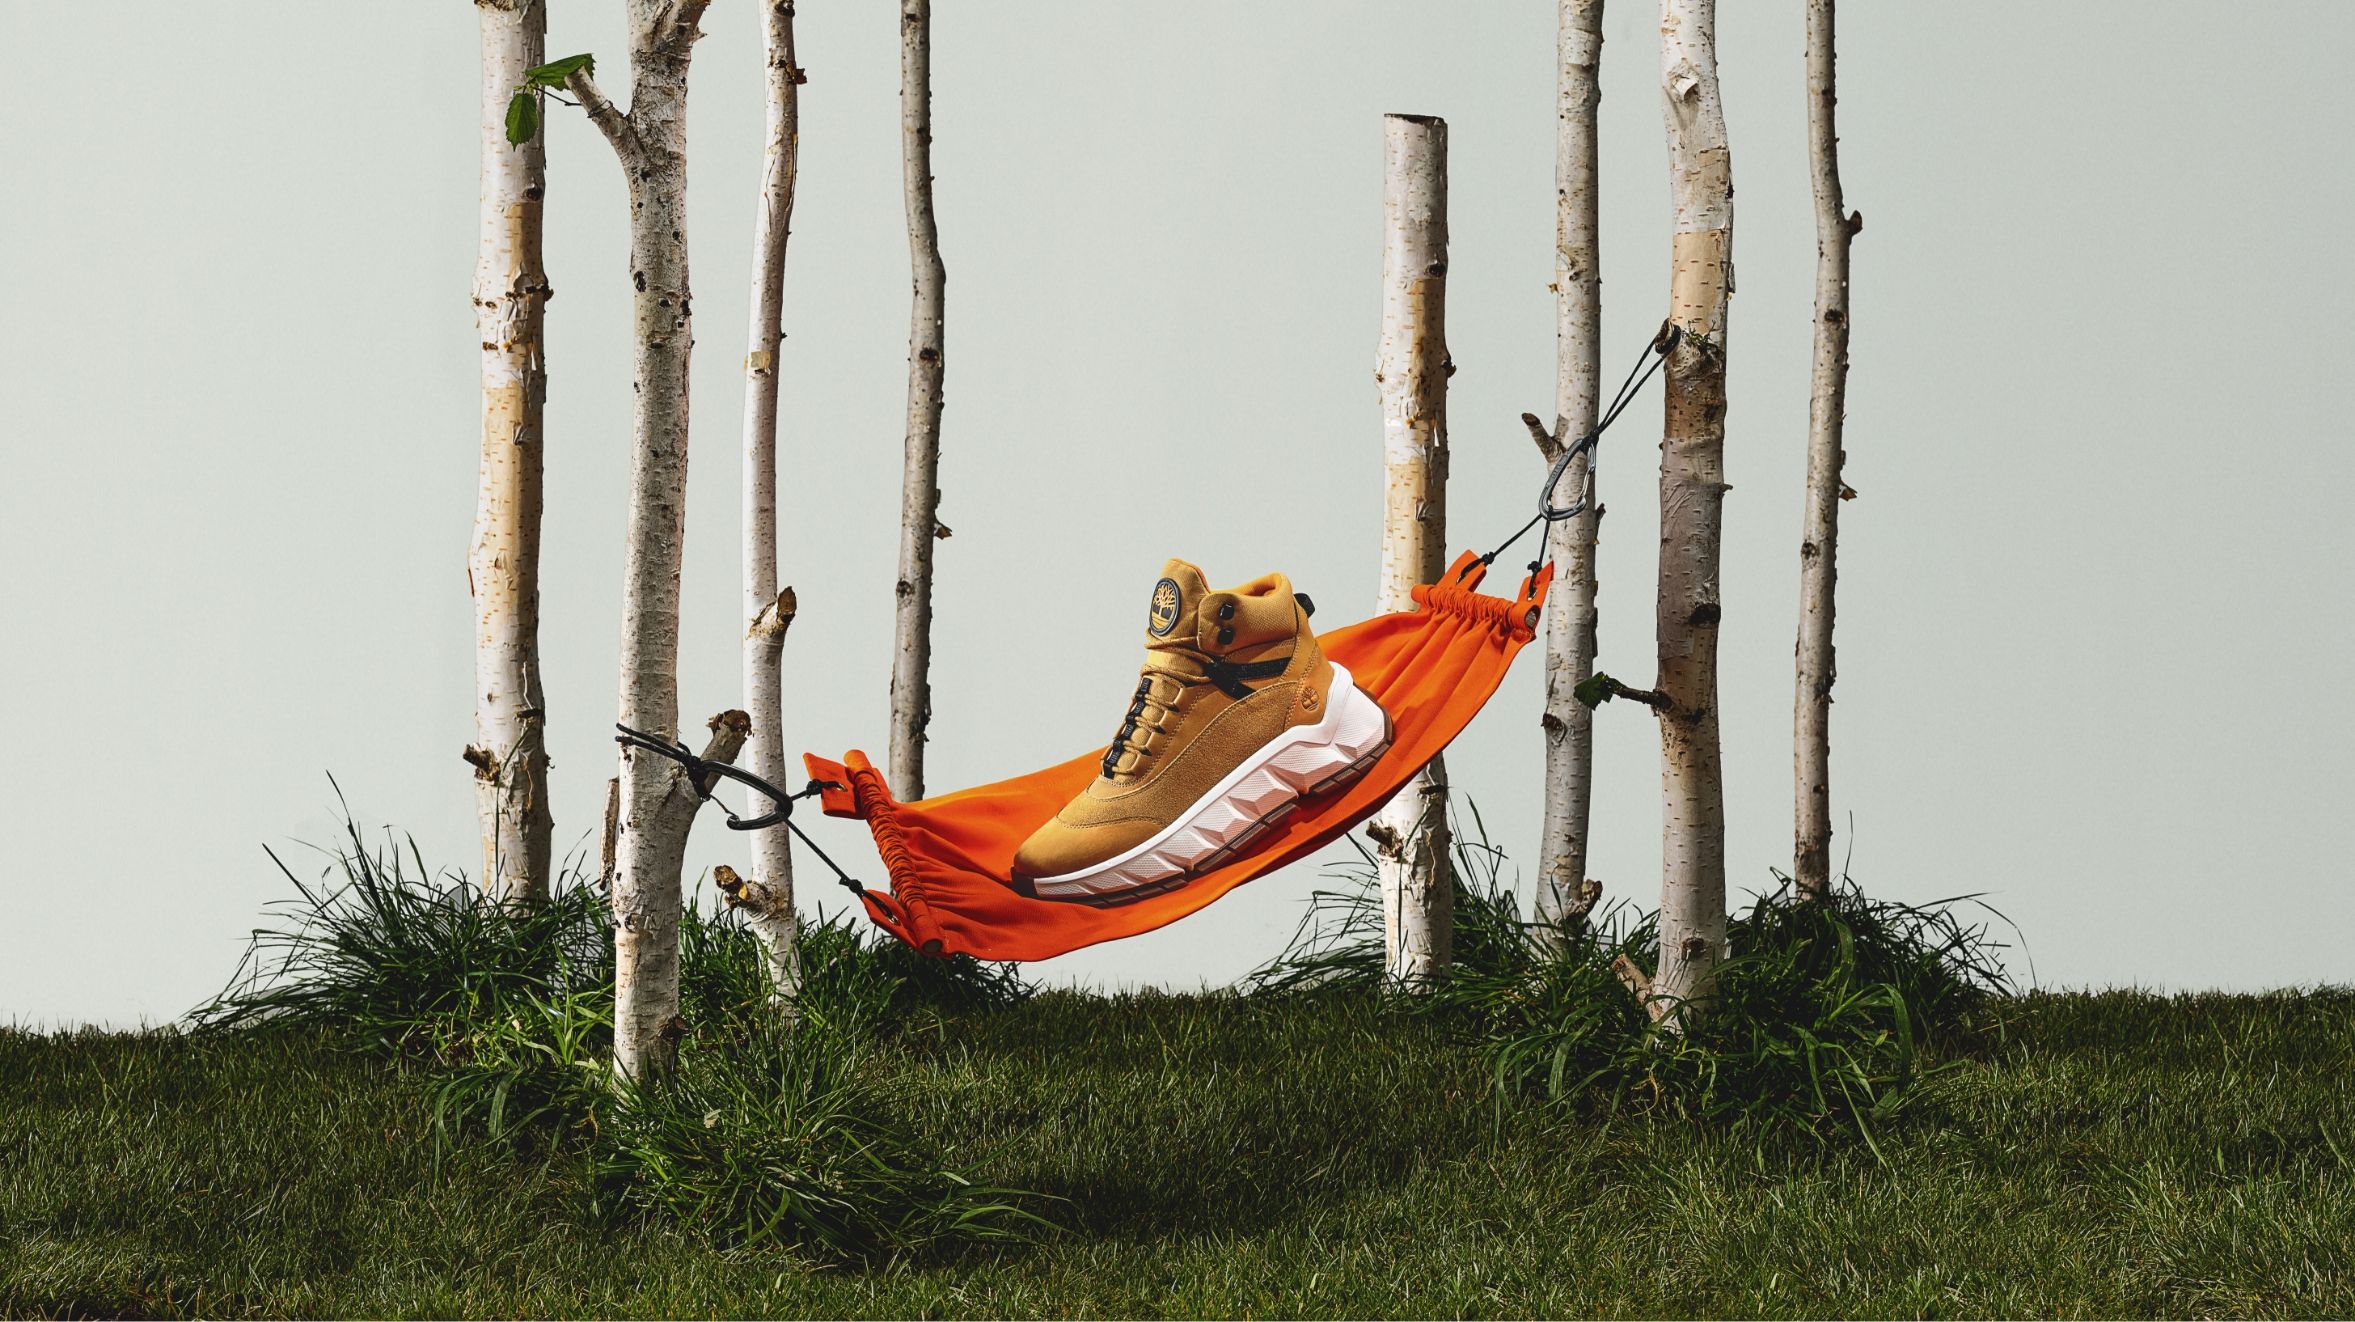 model set up of Timberland boot in small hammock tight to trees with grass below